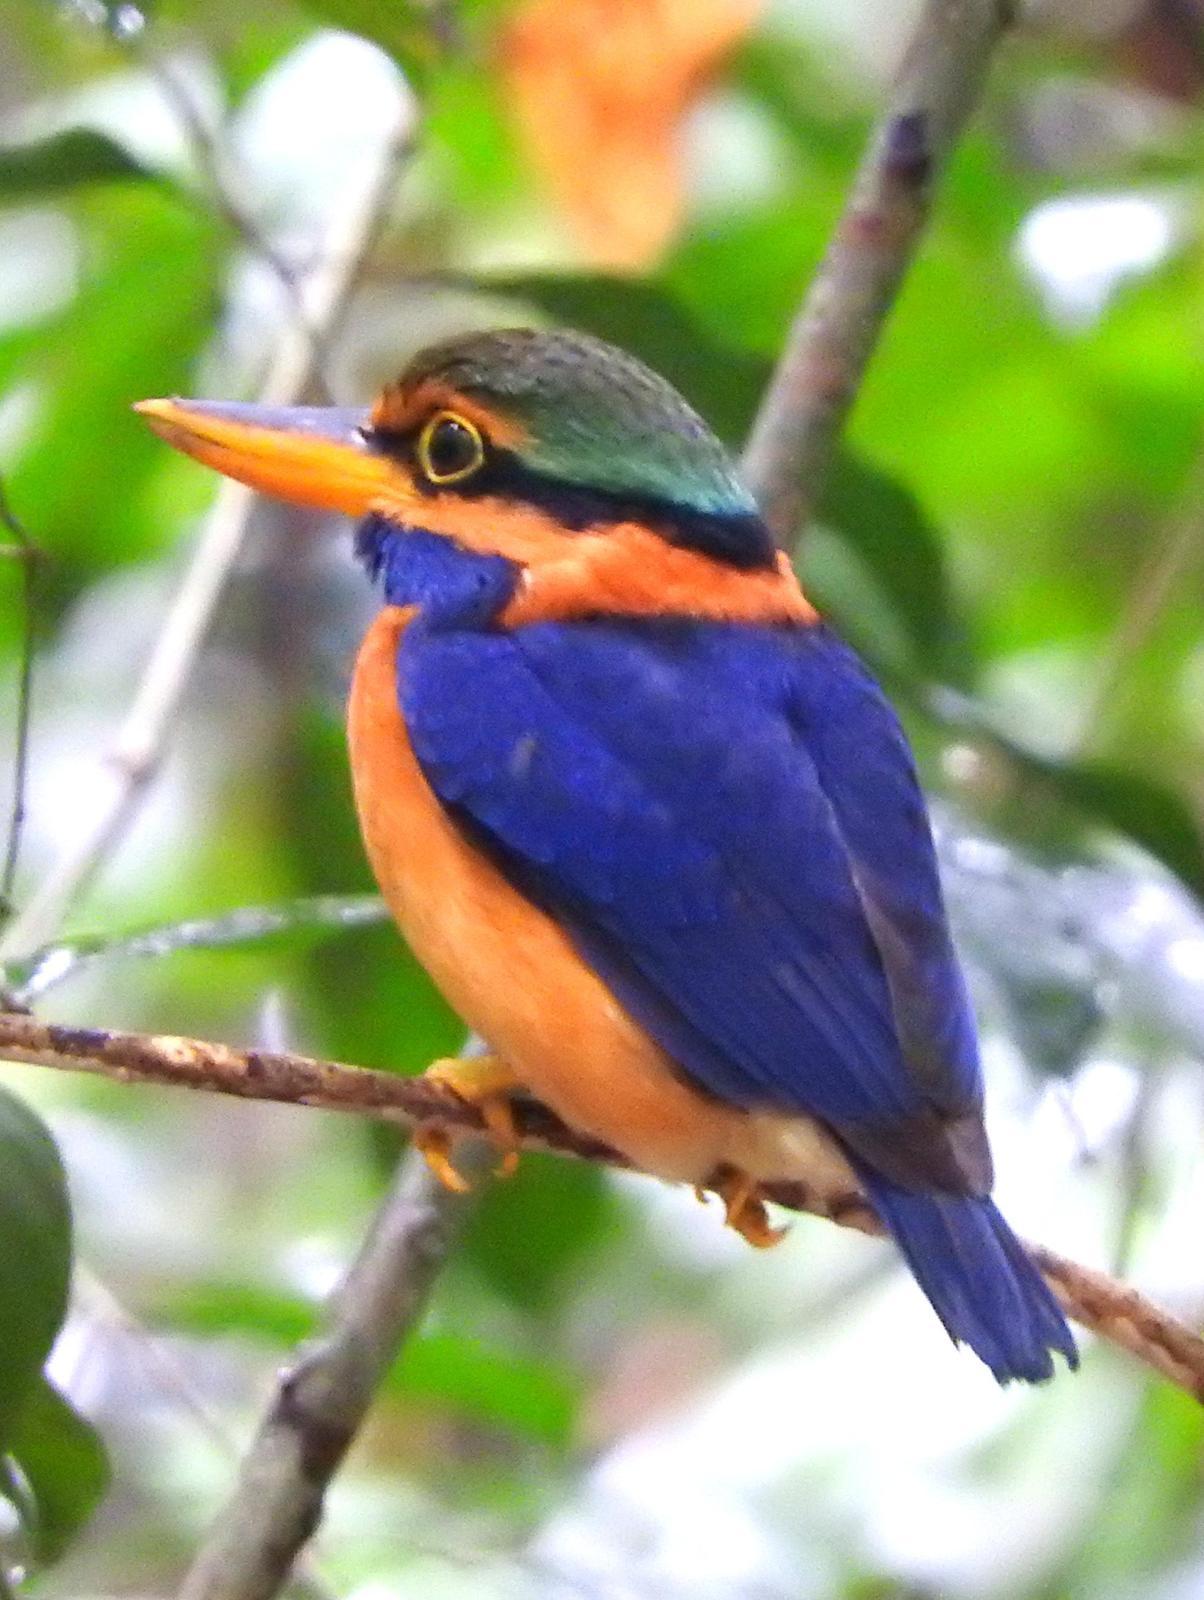 Rufous-collared Kingfisher Photo by Todd A. Watkins